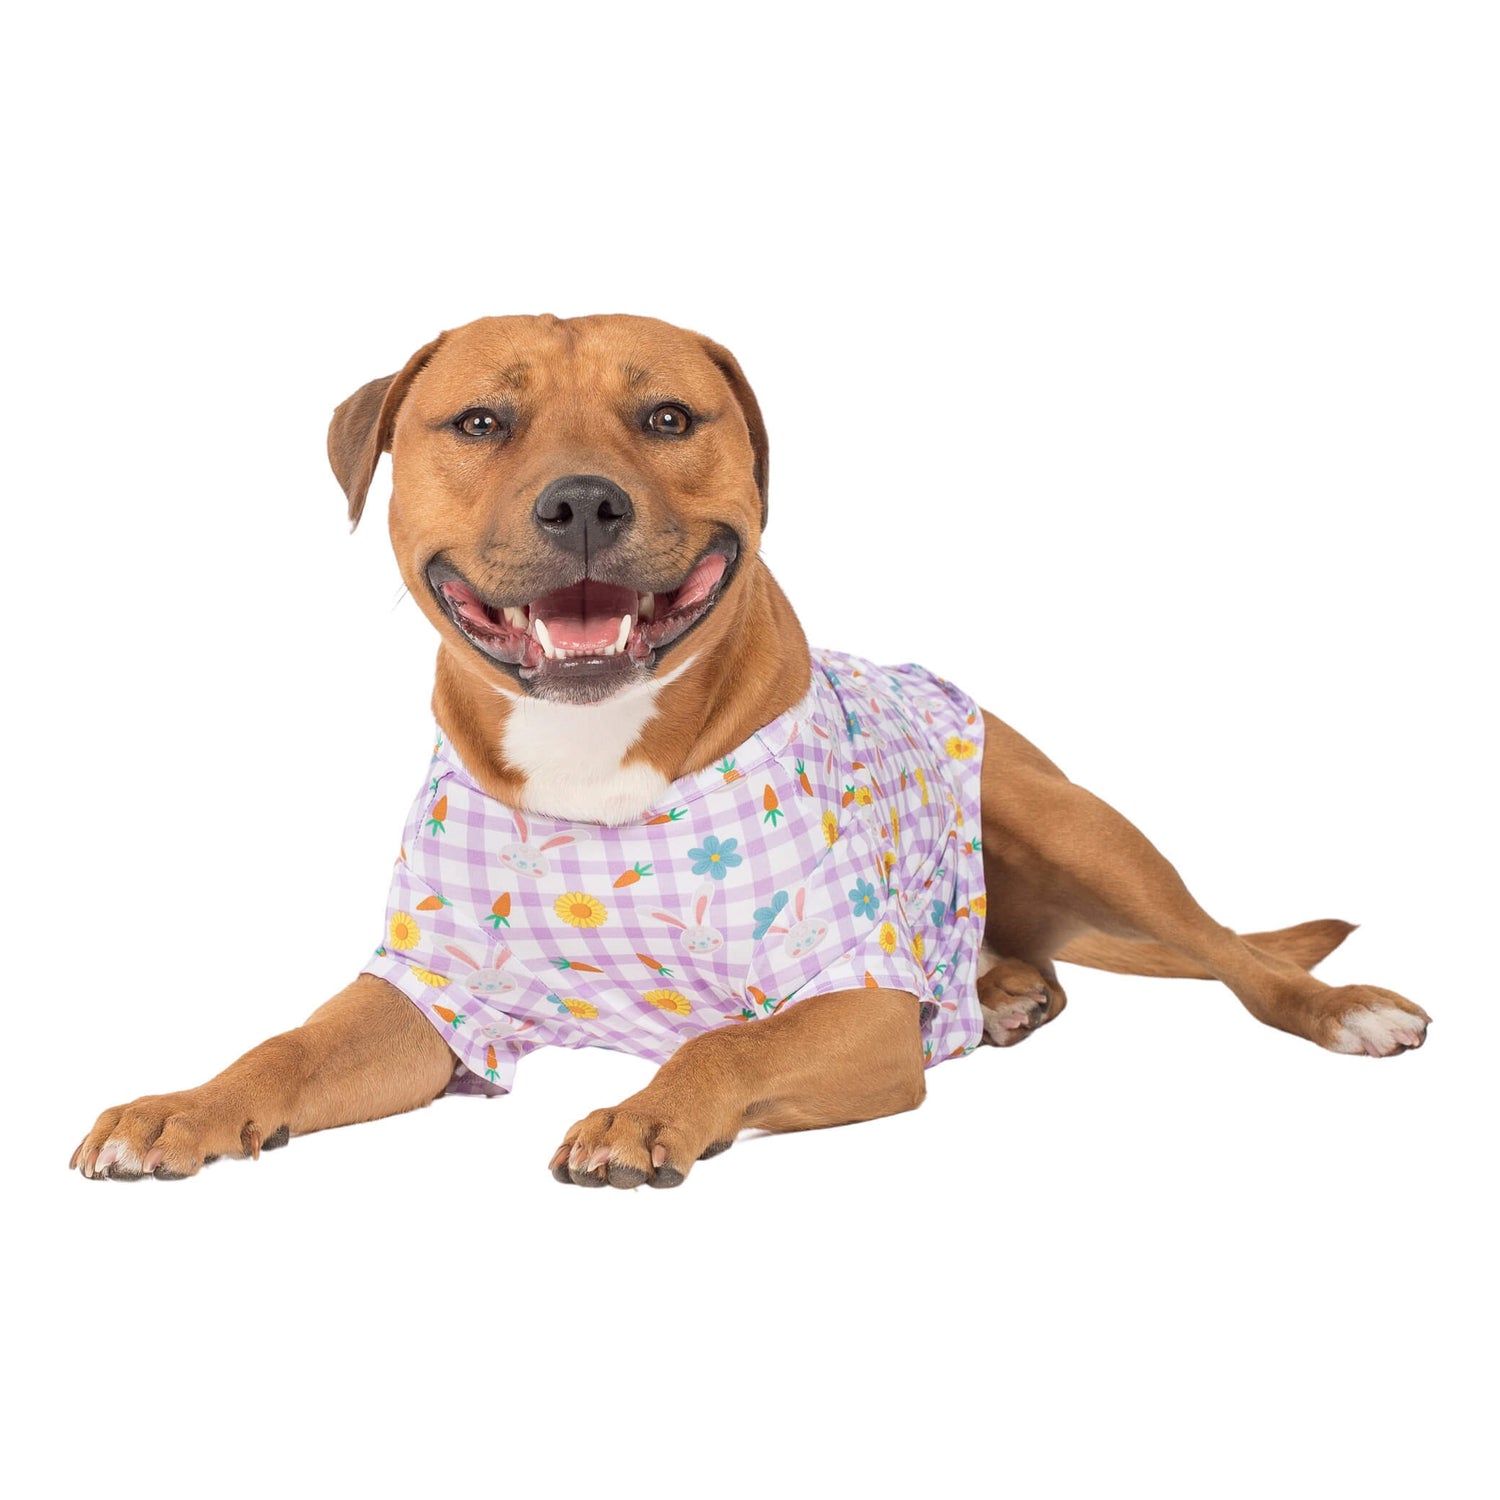 A staffy wearing Vibrant Hounds Hoppy Easter shirt for dogs.